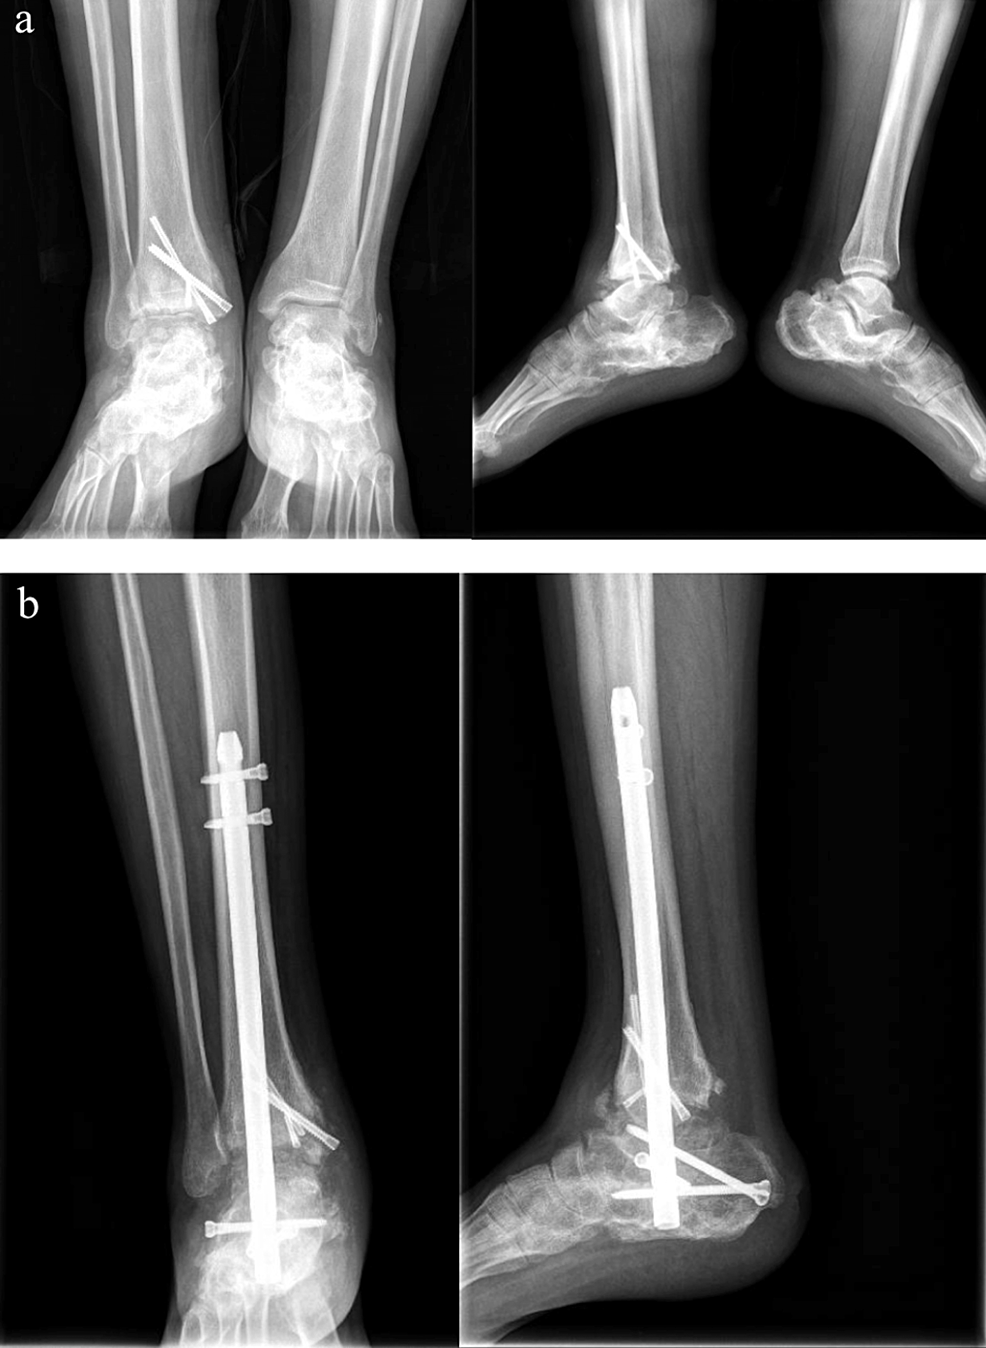 Calcaneotalotibial arthrodesis by retrograde intramedullary nailing using  expert tibia nail for charcot osteoneuropathy of the foot: A case series -  ScienceDirect